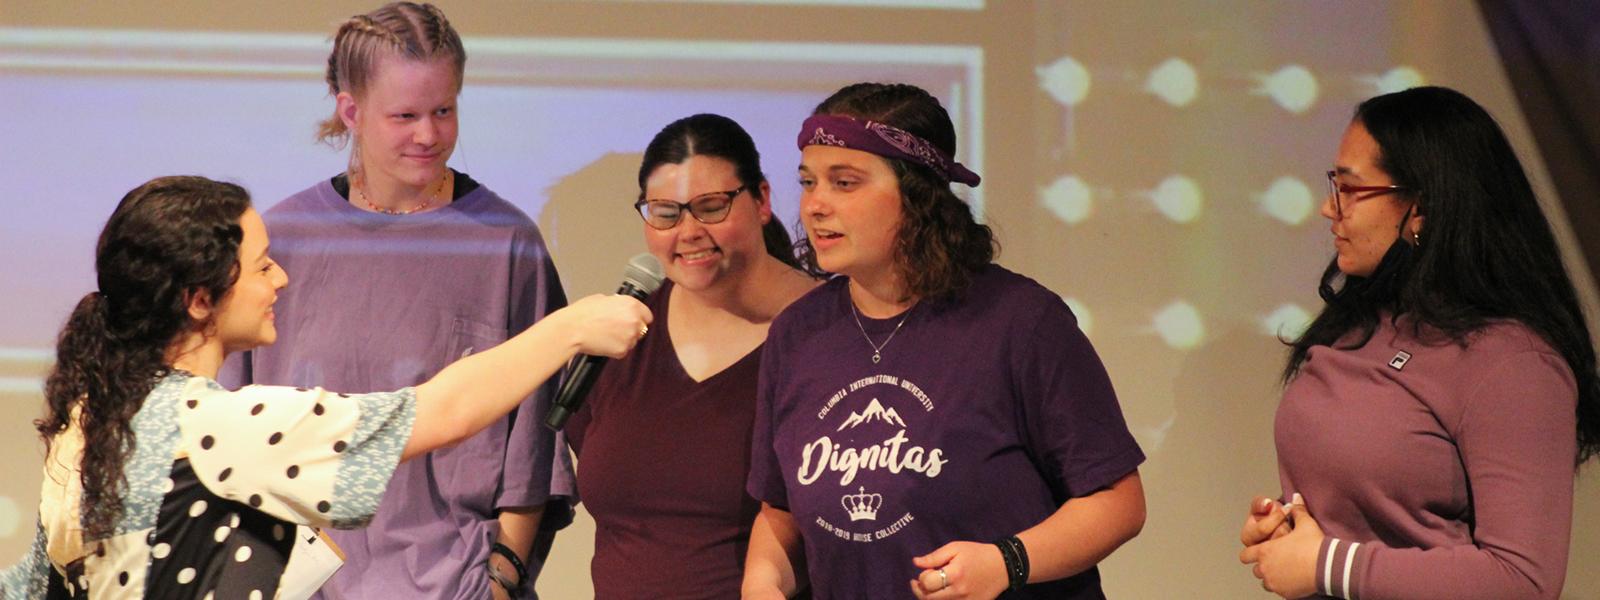 The House of Dignitas answers a question during "House Feud." (Photos by Macey Drye, CIU Student Photographer)